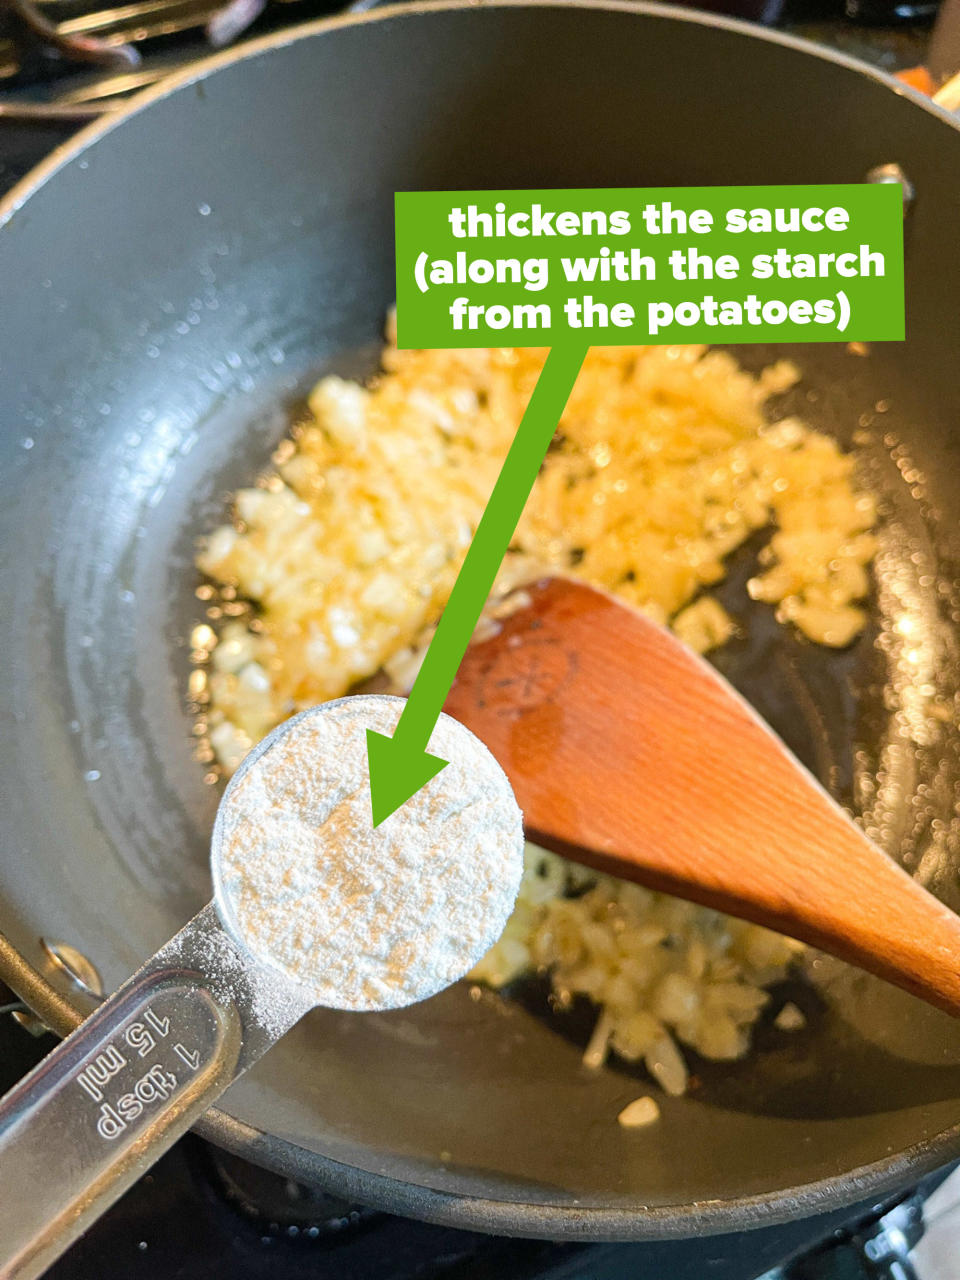 A scoop of flour being added to the recipe, with a note saying it works in tandem with the starch of the potatoes to thicken the sauce